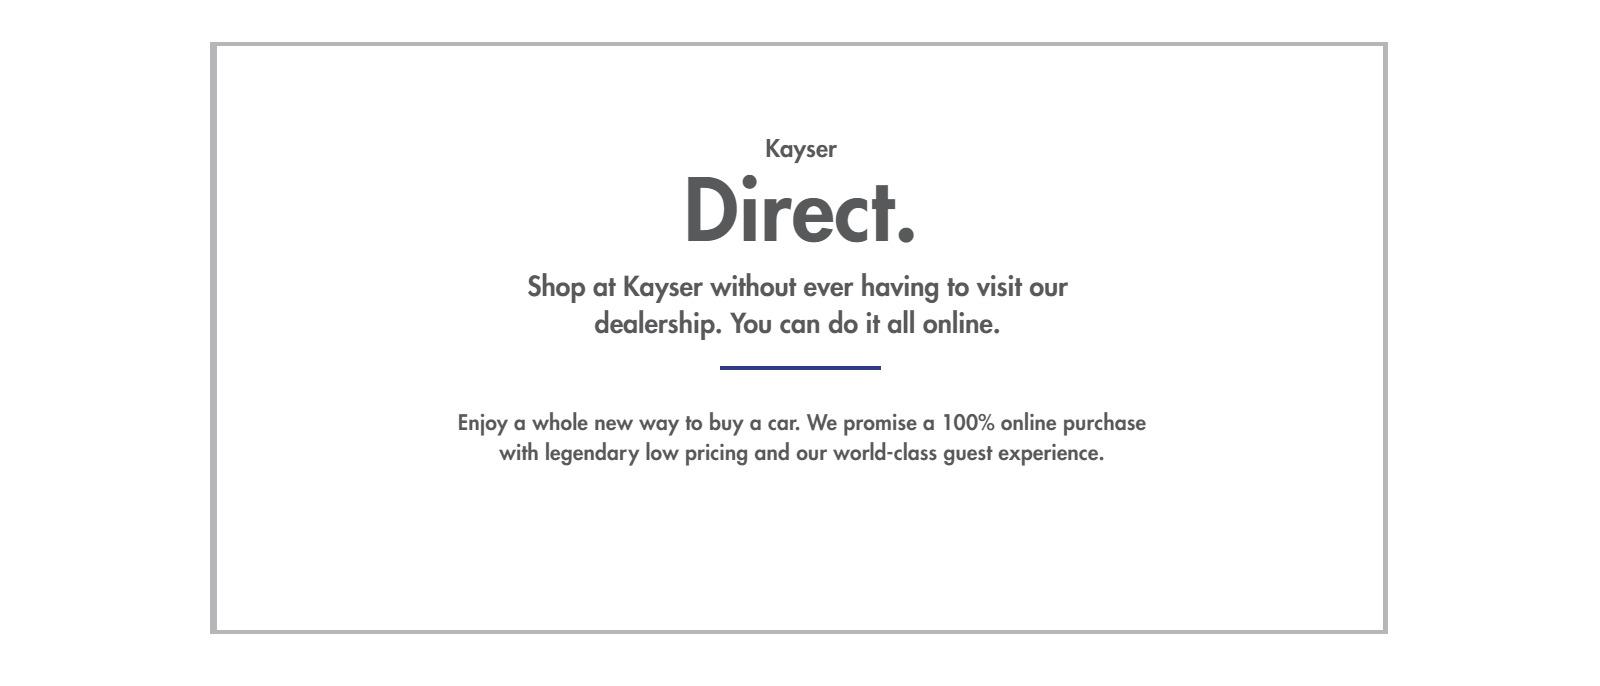 Kayser Direct
Shop at Kayser without ever having to visit our
dealership. You can do it all online.

Enjoy a whole new way to buy a car. We promise a 100% online purchase
with legendary low pricing and our world-class guest experience.